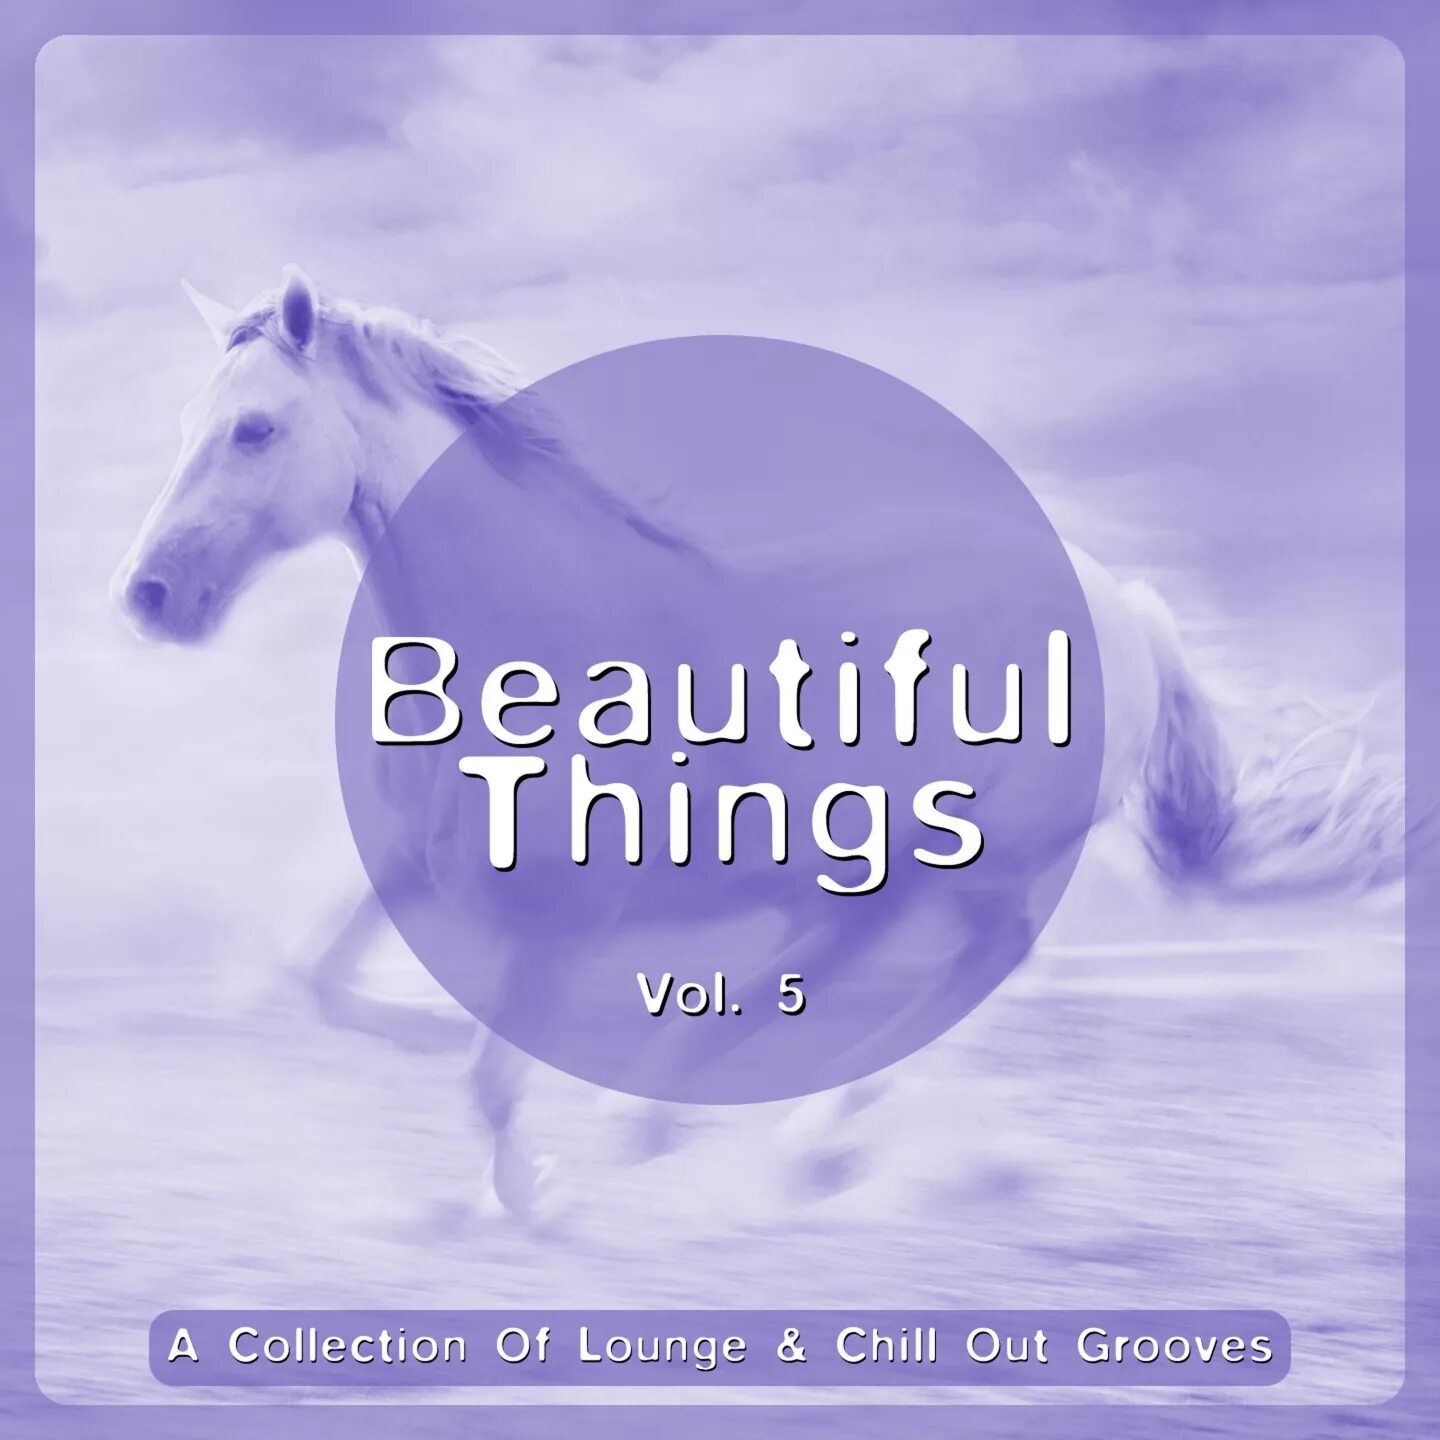 Сборник Chill out на CD. Andain beautiful things. Альбом Chill out - (Gold collection) - 2010г. Alma Chill out альбомы.